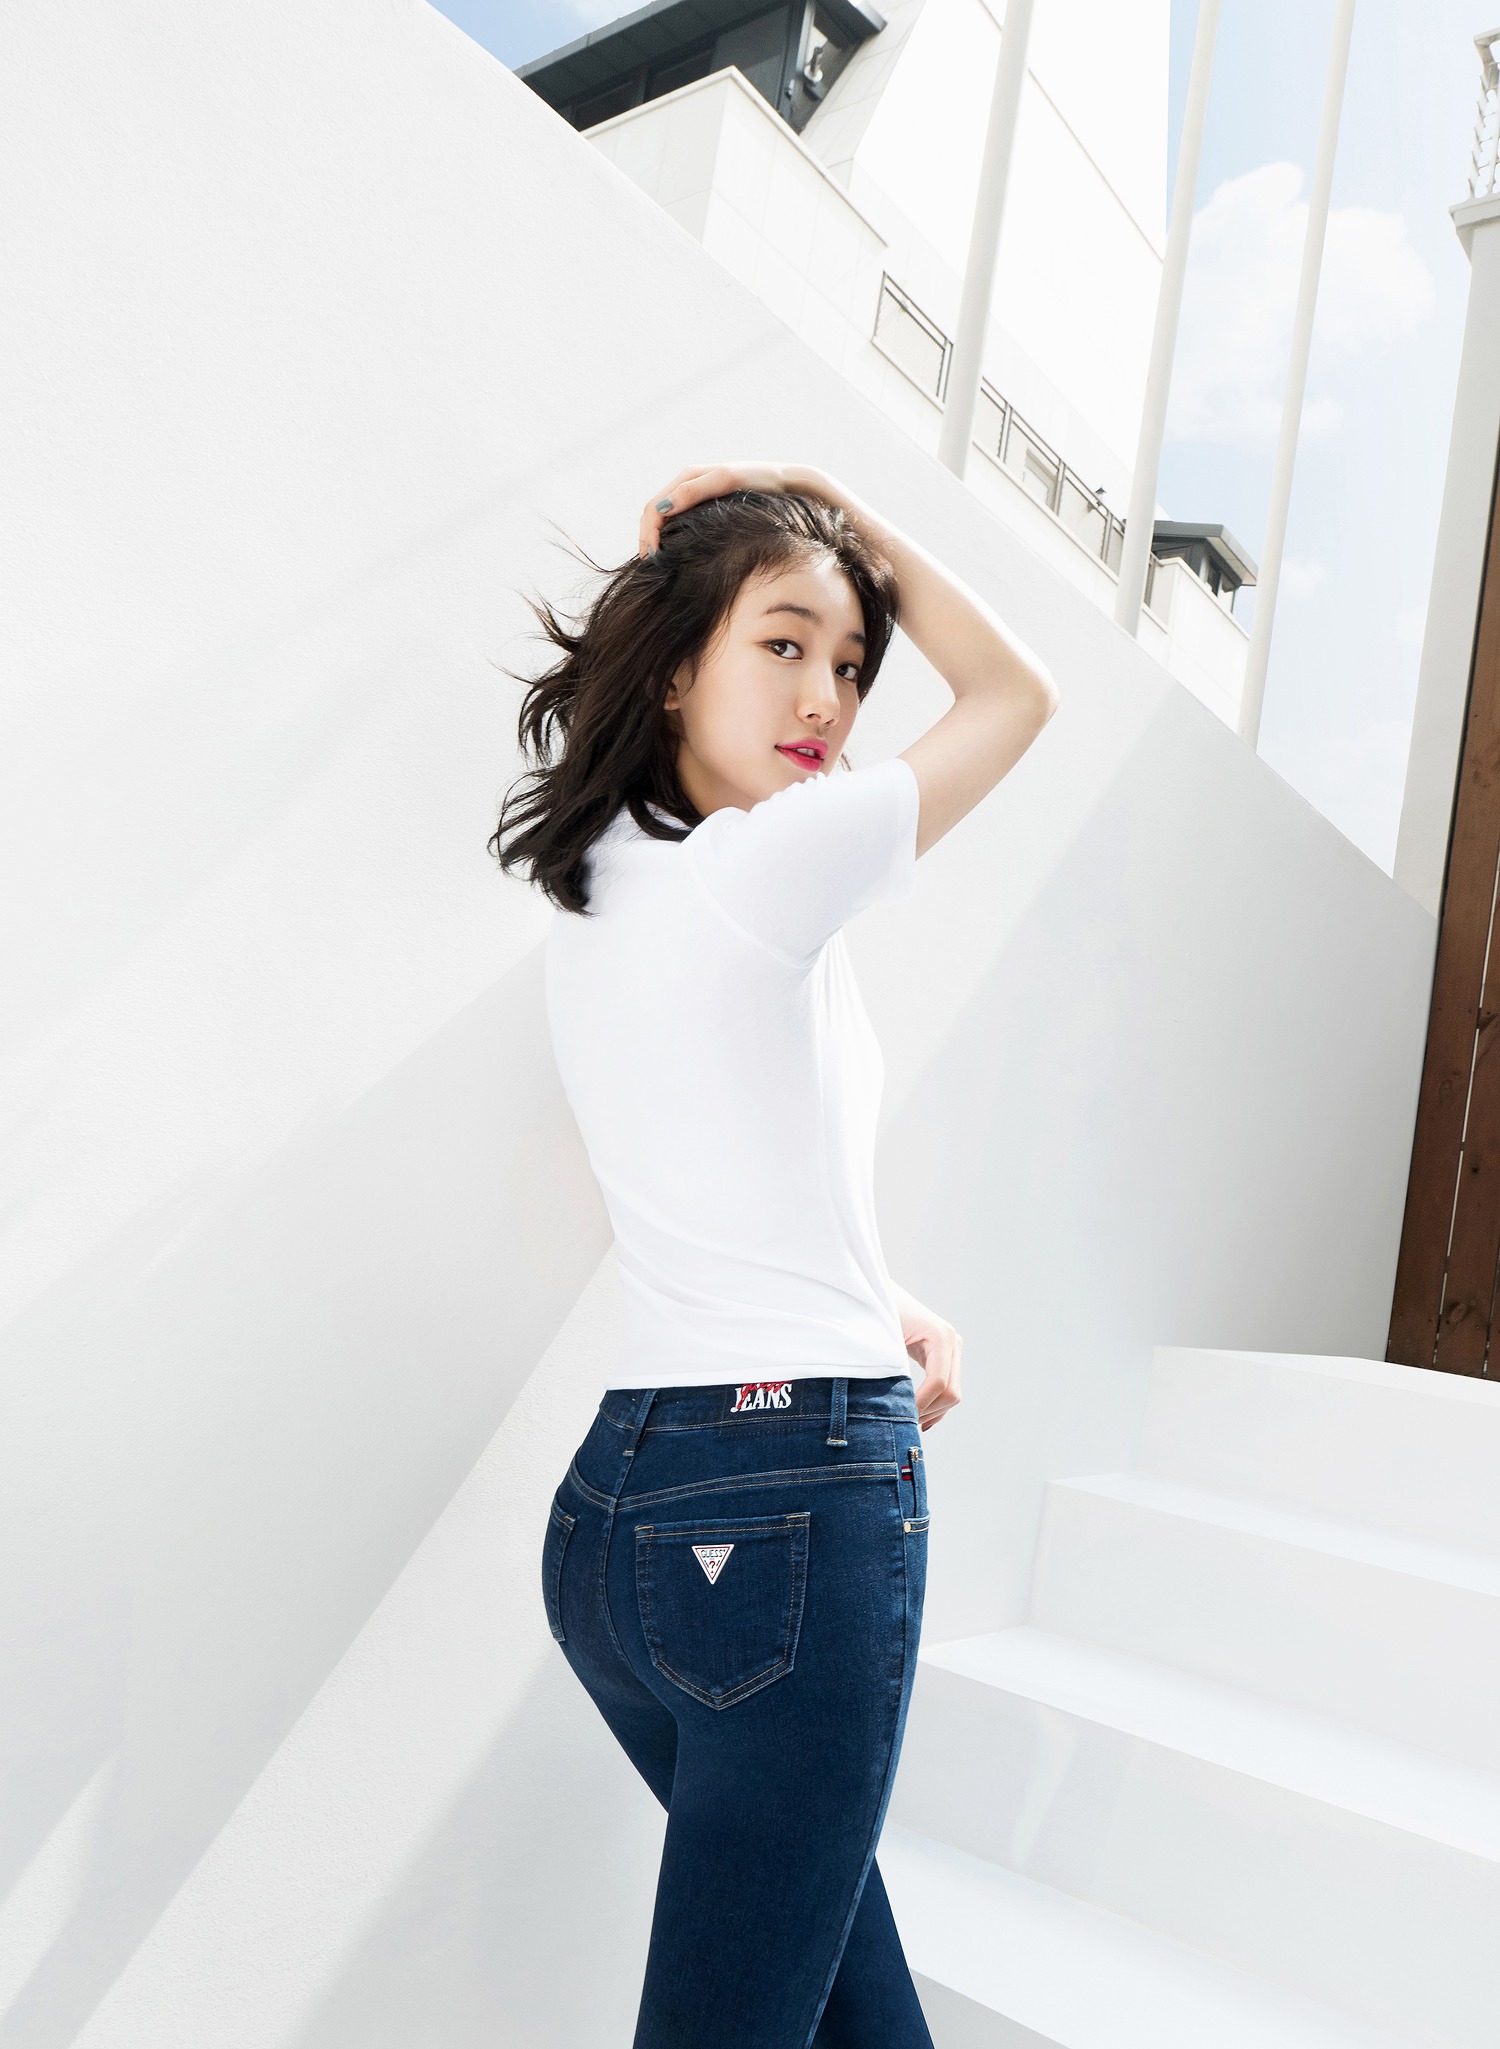 Suzy Guess Jeans pictorial.